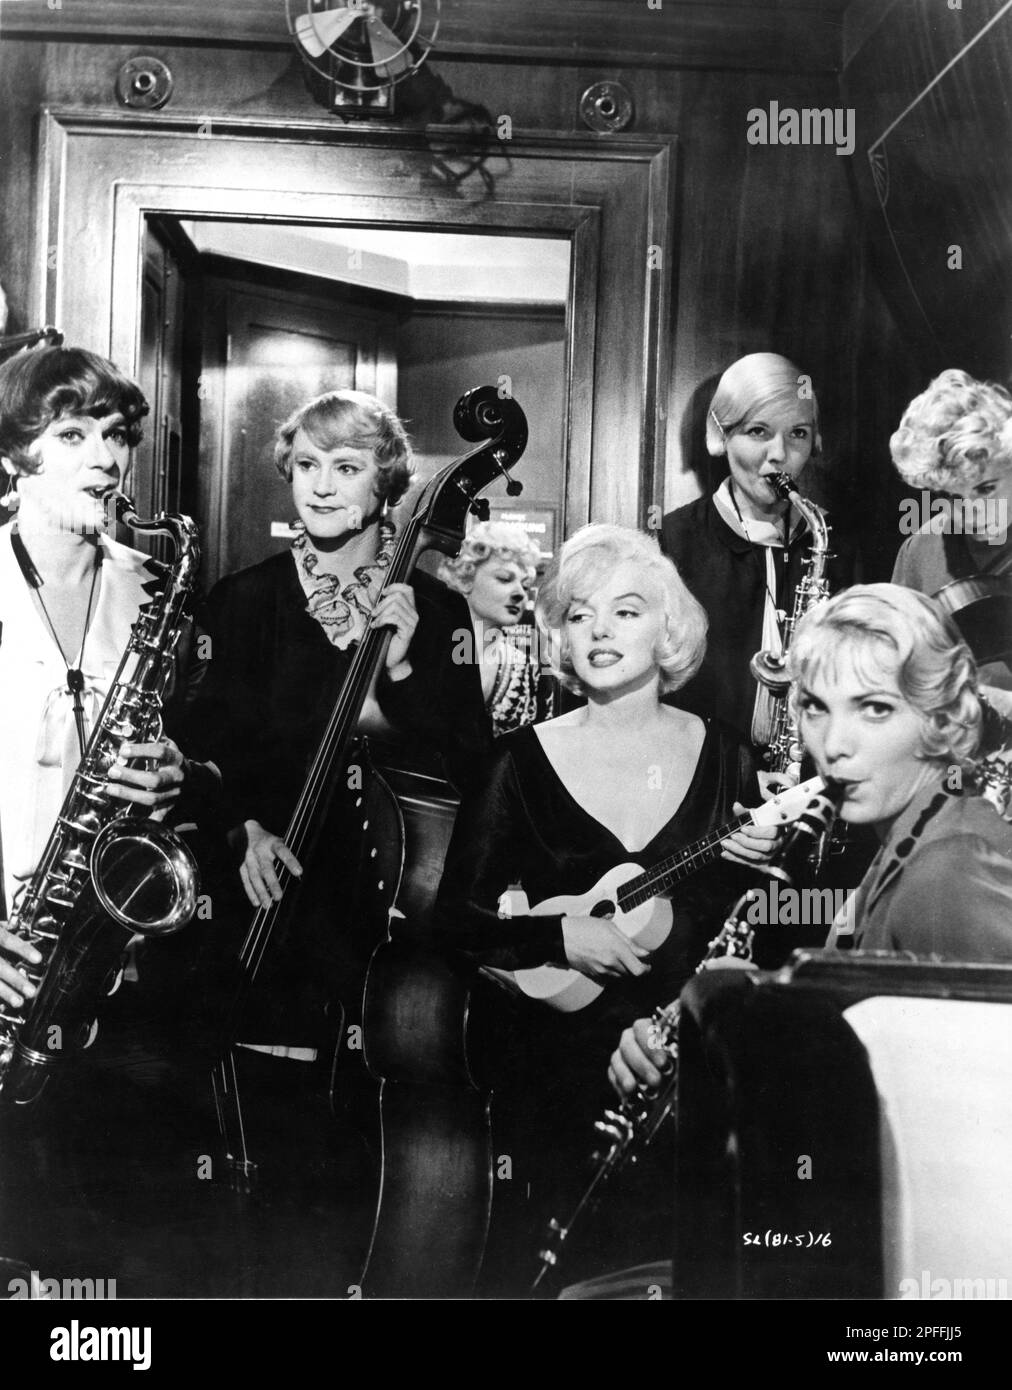 TONY CURTIS JACK LEMMON and MARILYN MONROE in SOME LIKE IT HOT 1959 director BILLY WILDER screenplay Billy Wilder and I.A.L. Diamond Ashton Productions / The Mirisch Corporation / United Artists Stock Photo